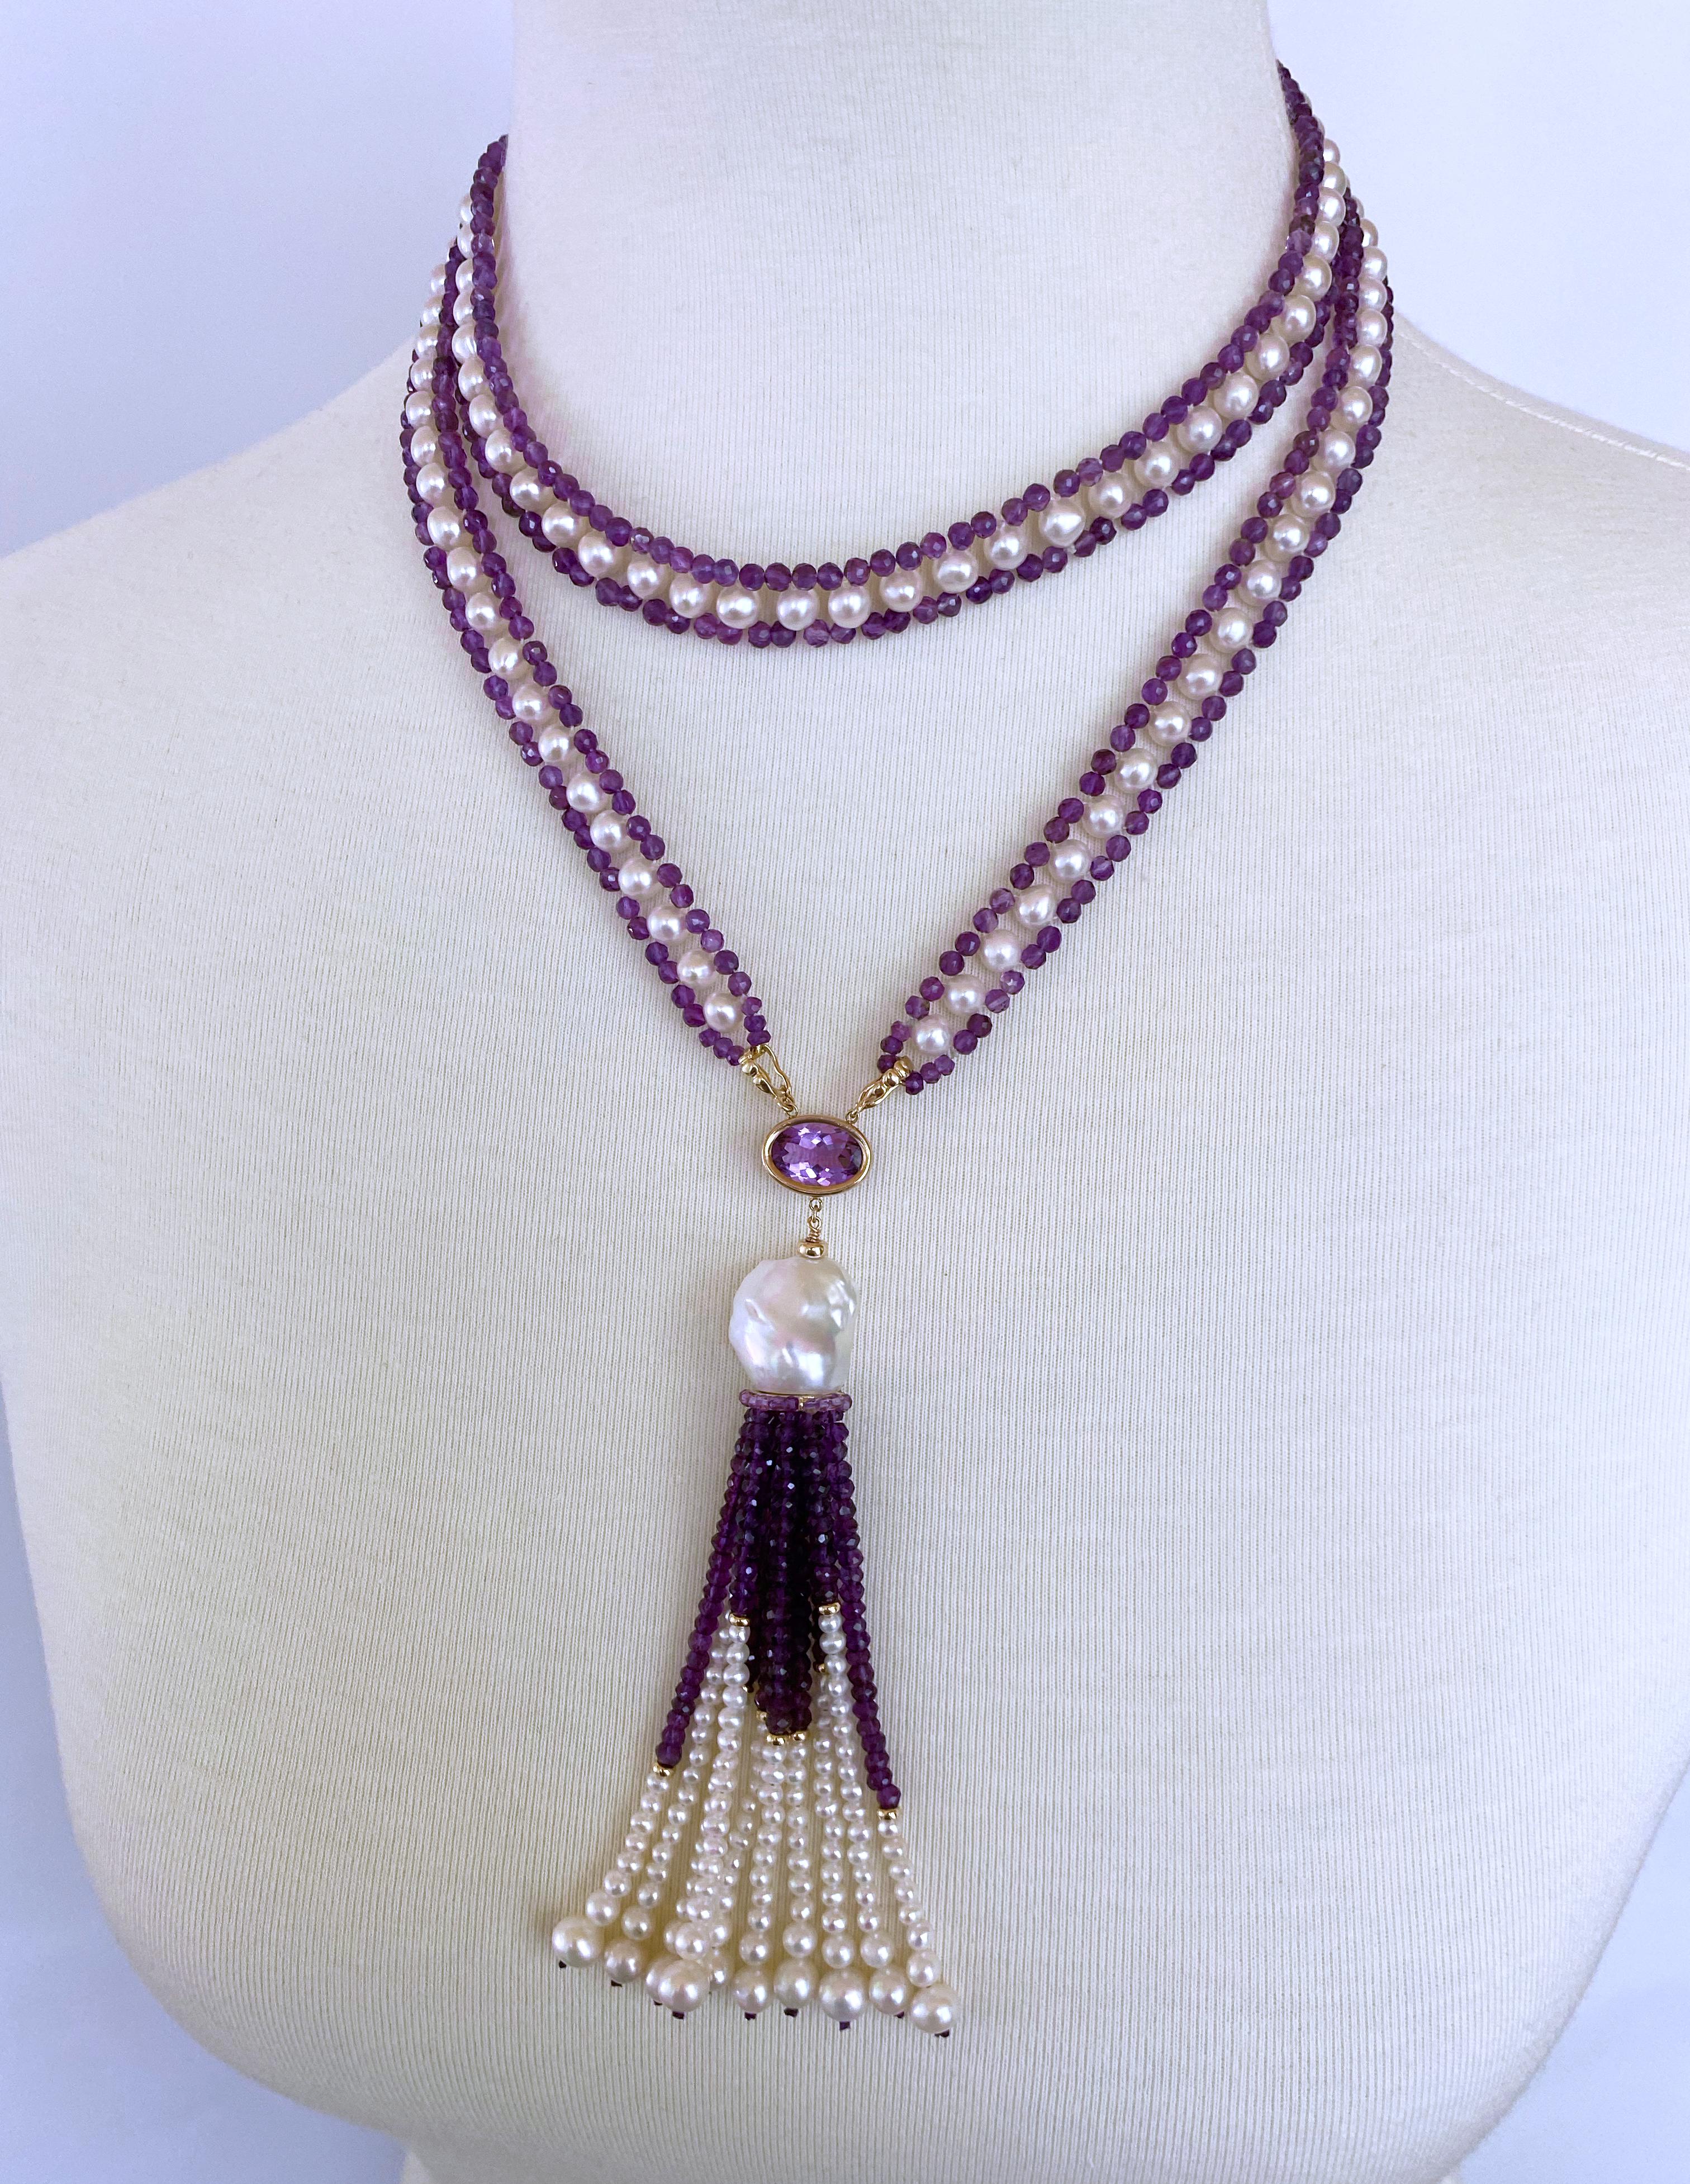 Beautiful piece by Marina J. This sizeless Sautoir is made with gorgeous faceted Amethyst beads that display pigmented Purple hues, all woven together with white Cultured Pearls. Measuring 35 inches sans Tassel, each end of this Sautoir meet at a